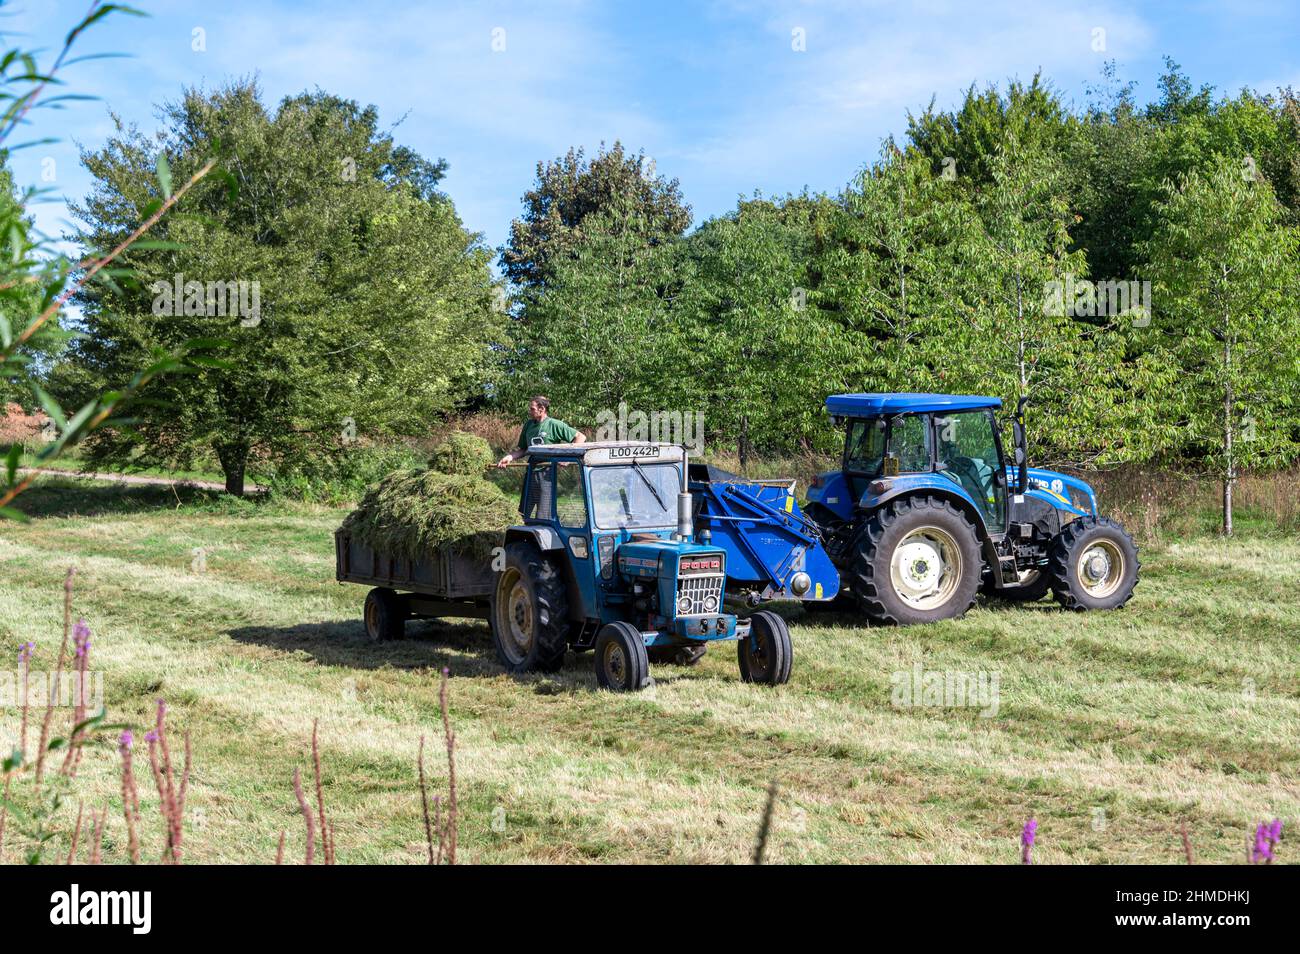 Cutting grass, with man loading grass onto a trailer, cutting machinery behind. Stock Photo